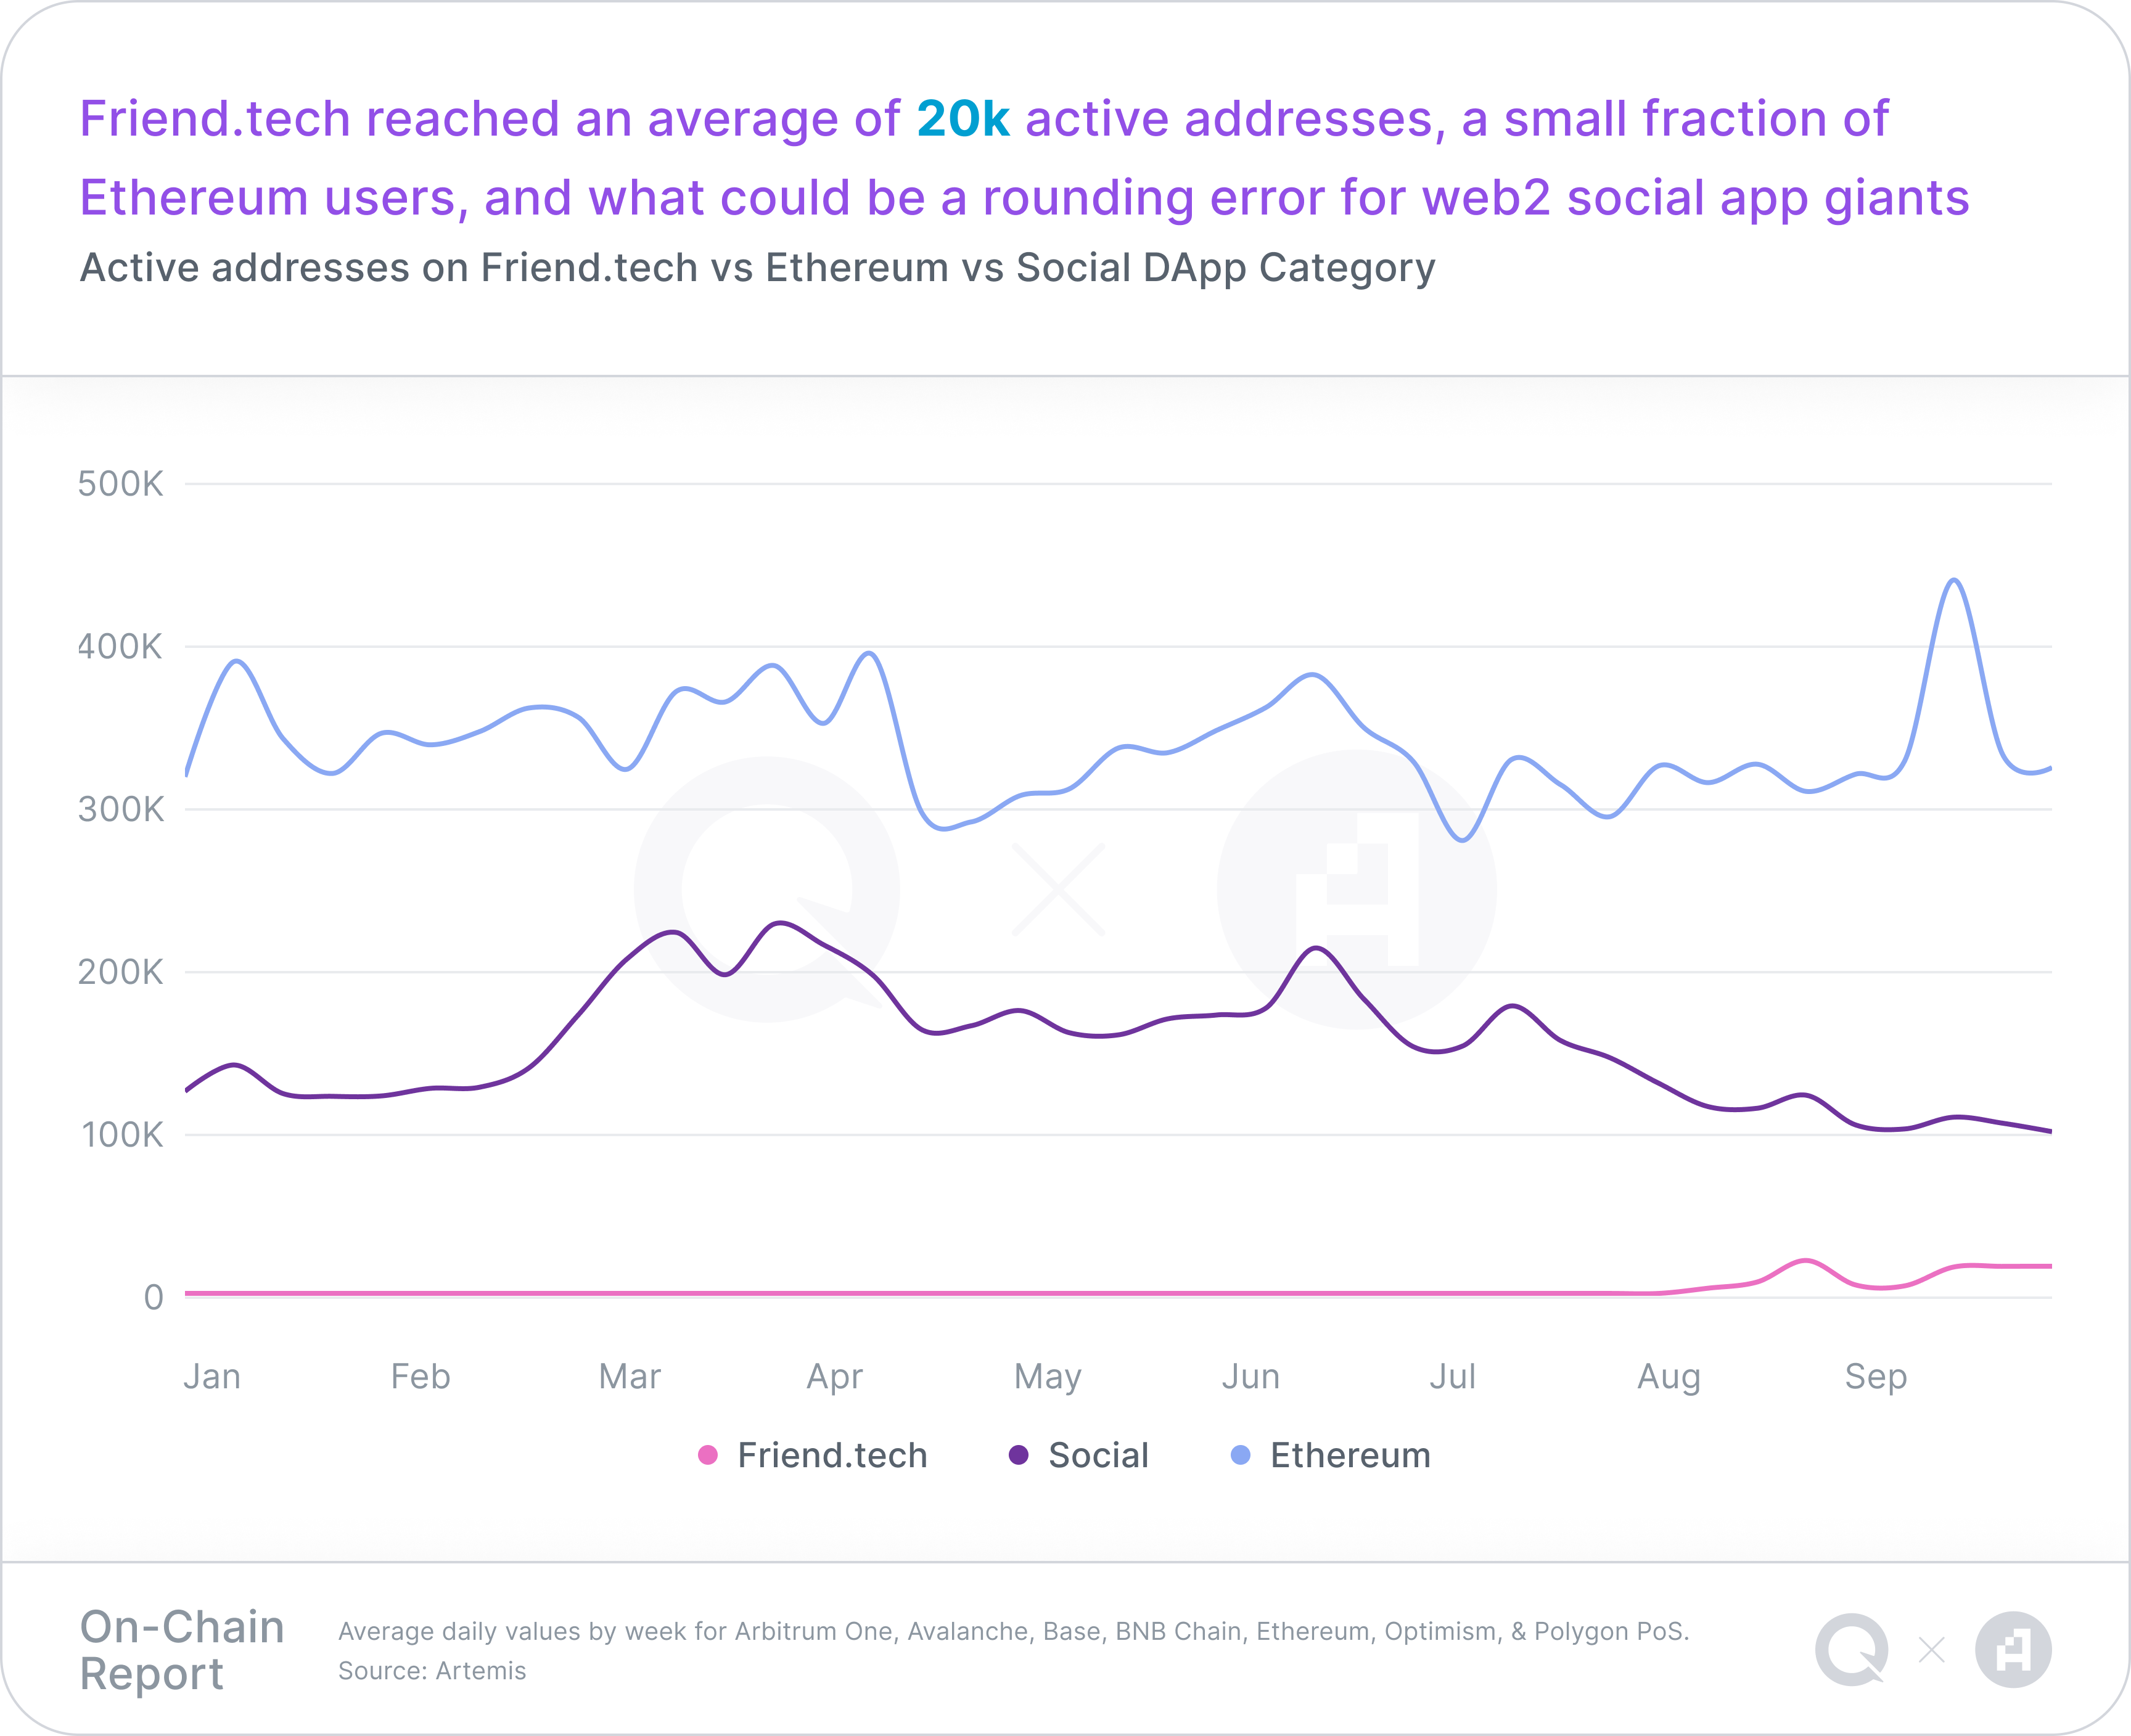 A chart representing Active addresses on Friend.tech vs Ethereum vs Social DApp Category, with a takeaway headline of "Friend.tech reached an average of 20k active addresses, a small fraction of Ethereum users, and what could be a rounding error for web2 social app giants"